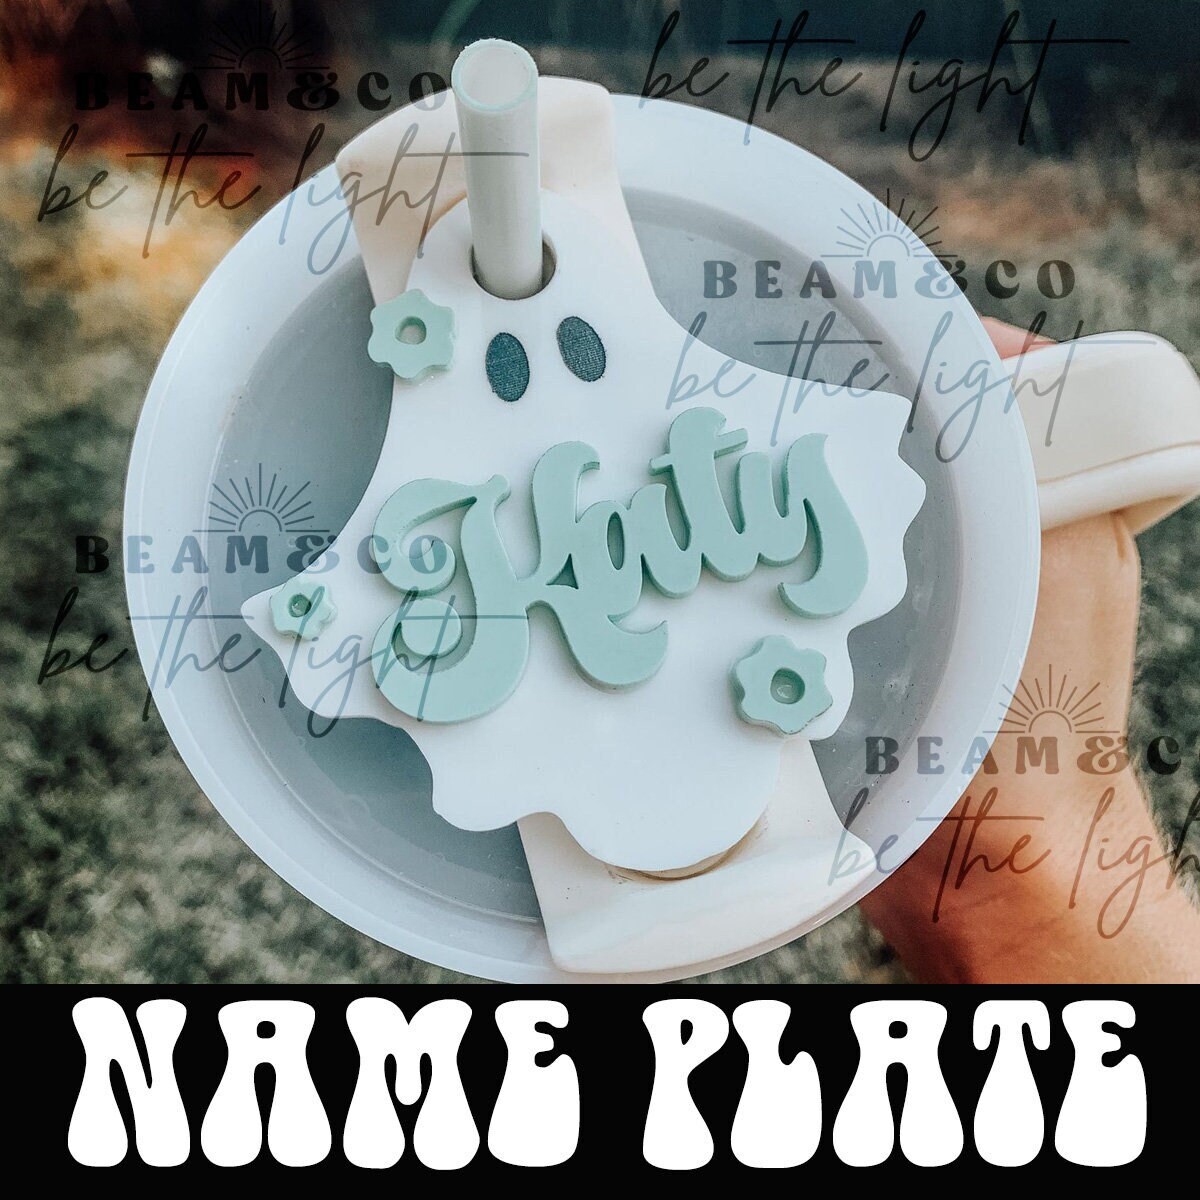 40 Oz Tumbler Cup Name Plate, Halloween Cup Tags, Ghost Tumbler